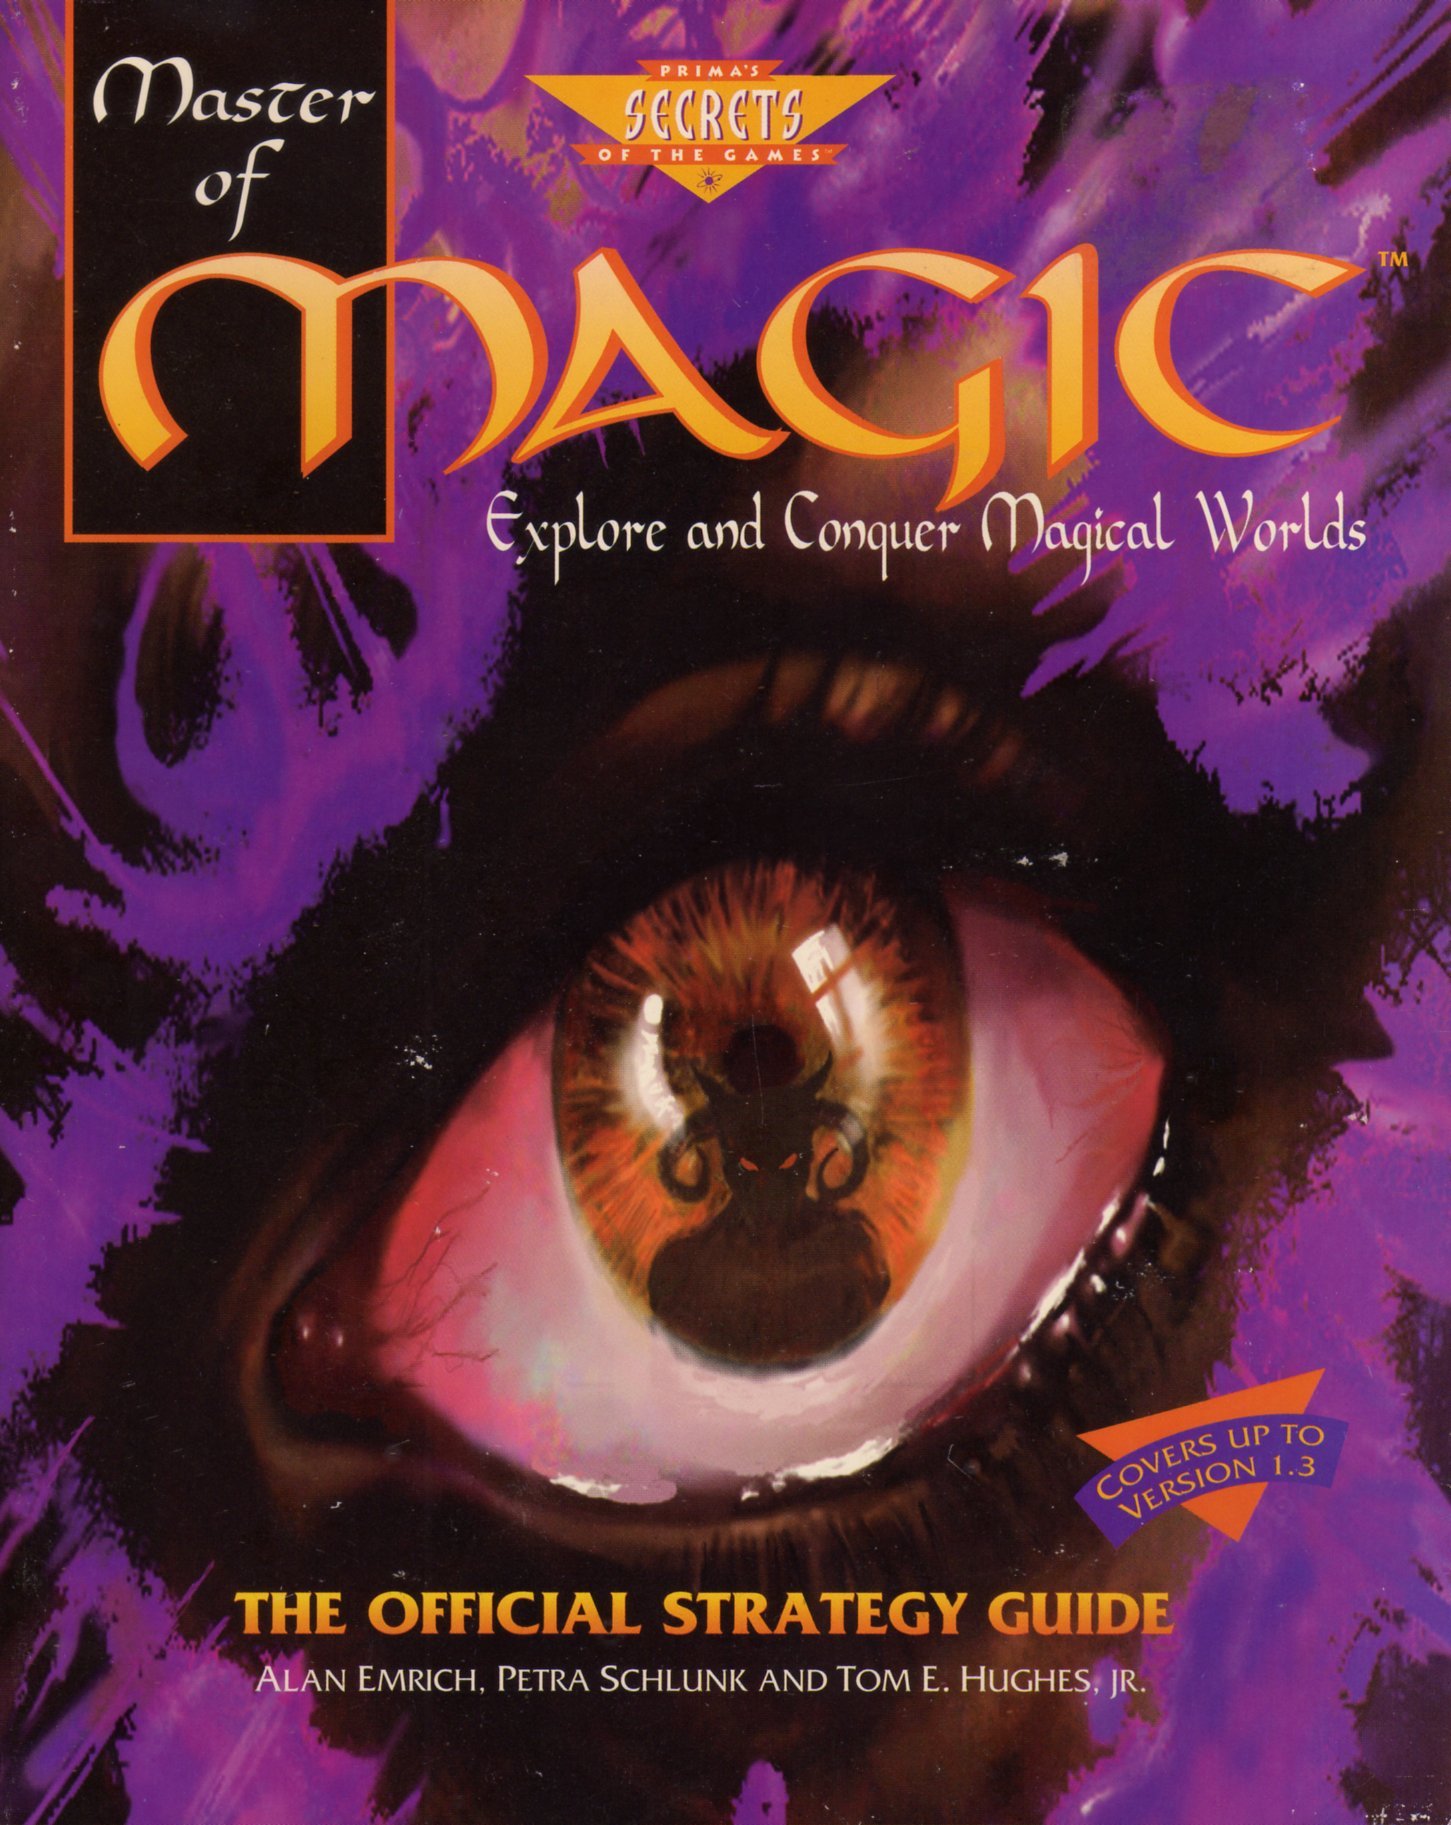 More information about "Master of Magic: The Official Strategy Guide"